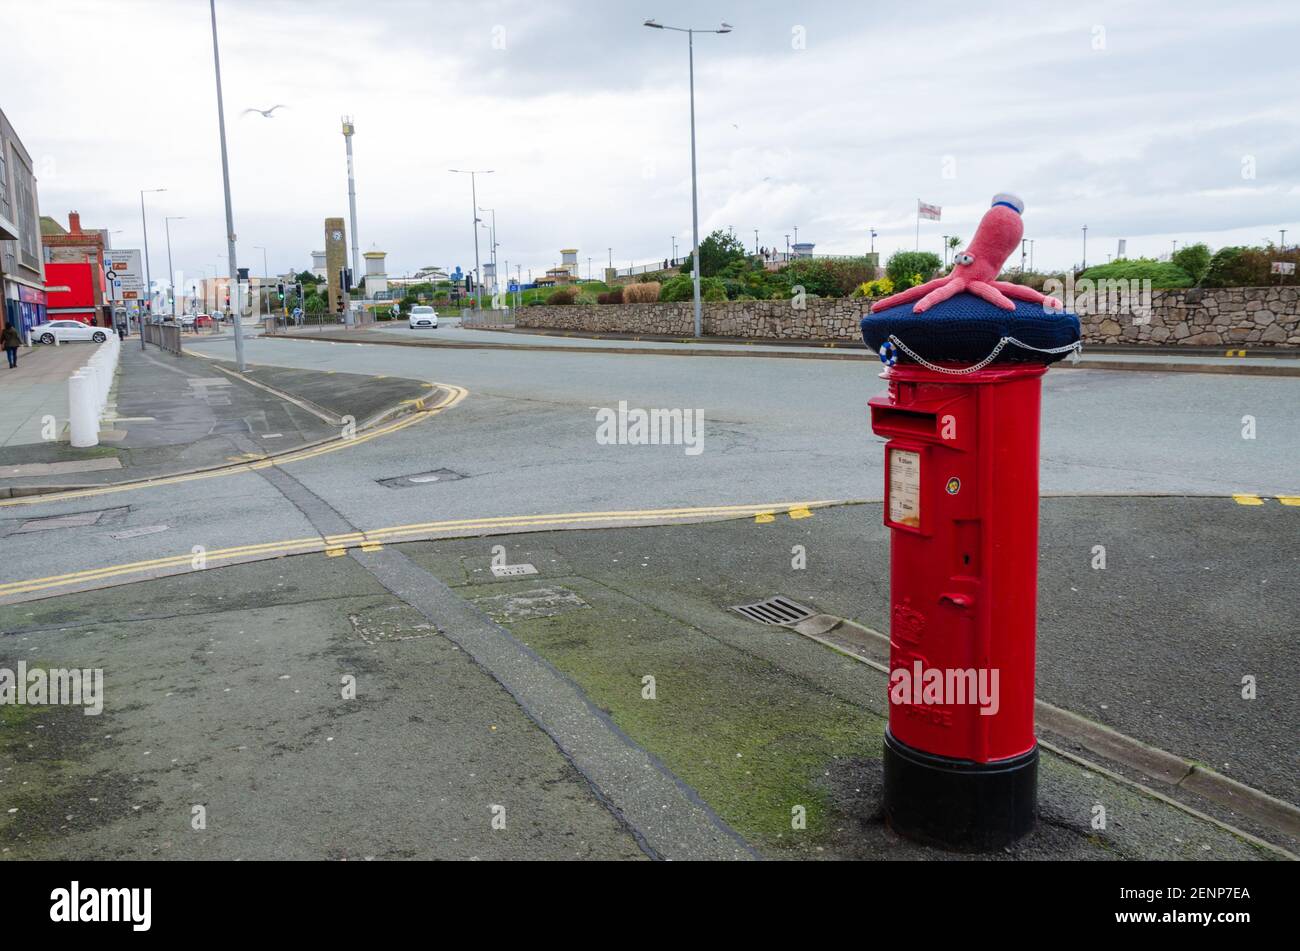 Rhyl, Denbighshire; UK: Feb 21, 2021: A post box is seen wearing a knitted decoration in the form of a pink octopus close to the Seaquarium of Rhyl Stock Photo